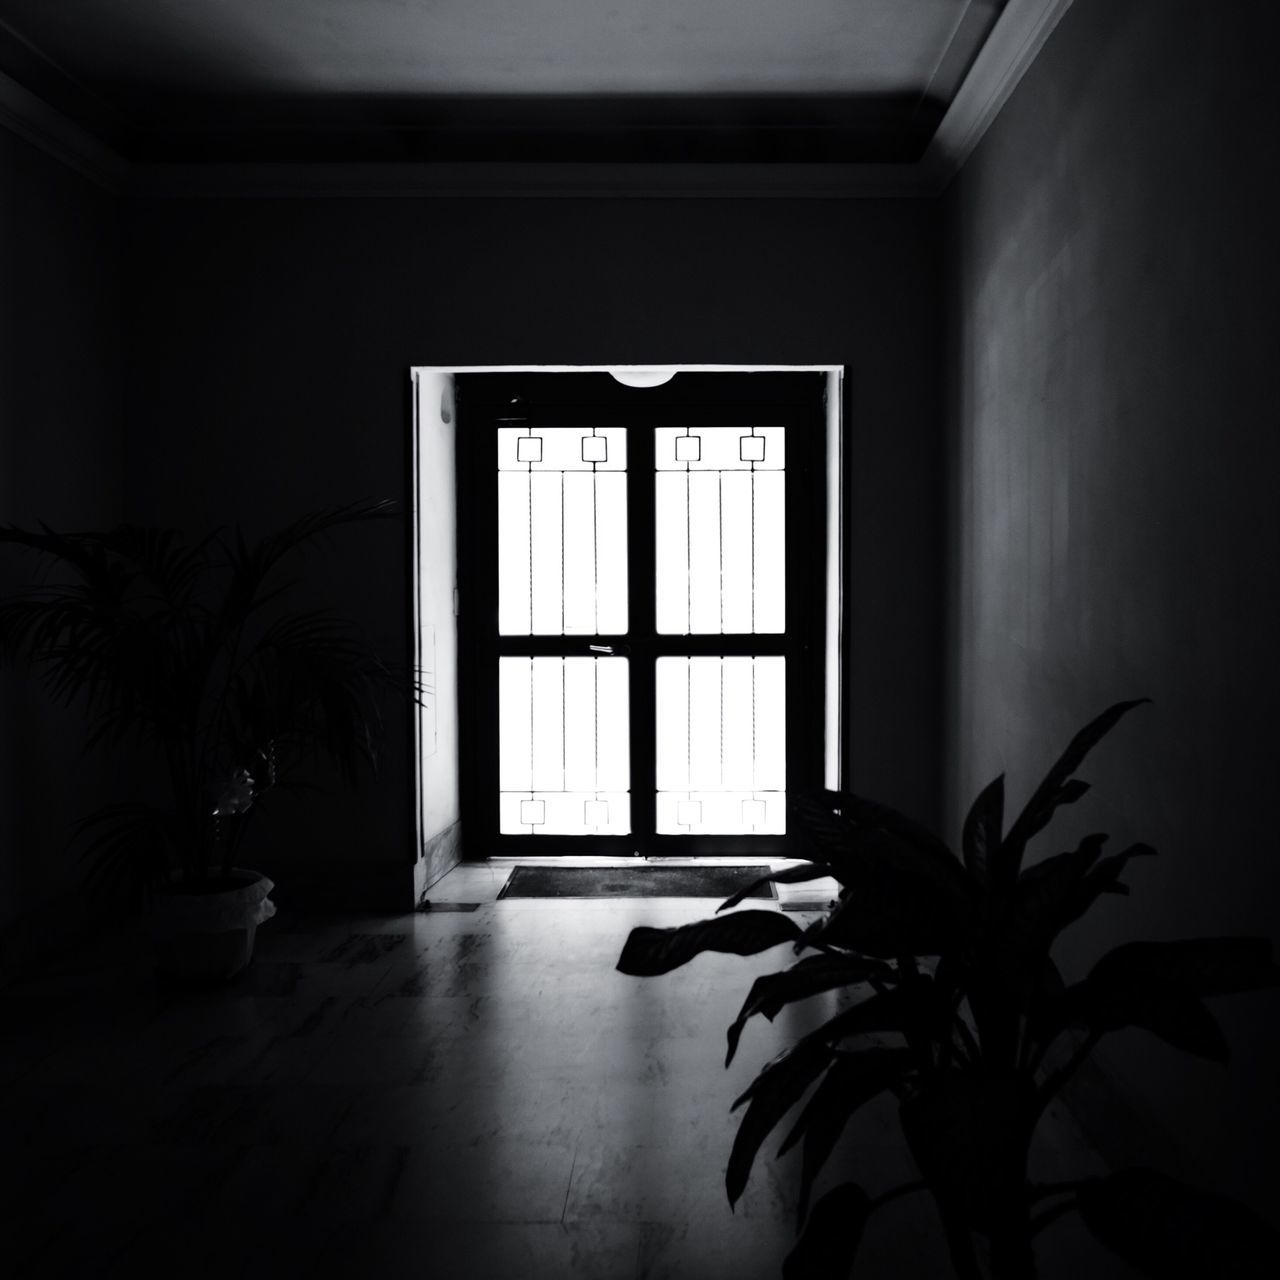 indoors, window, home interior, house, built structure, architecture, door, sunlight, curtain, potted plant, plant, wall, absence, wall - building feature, no people, ceiling, day, glass - material, closed, transparent